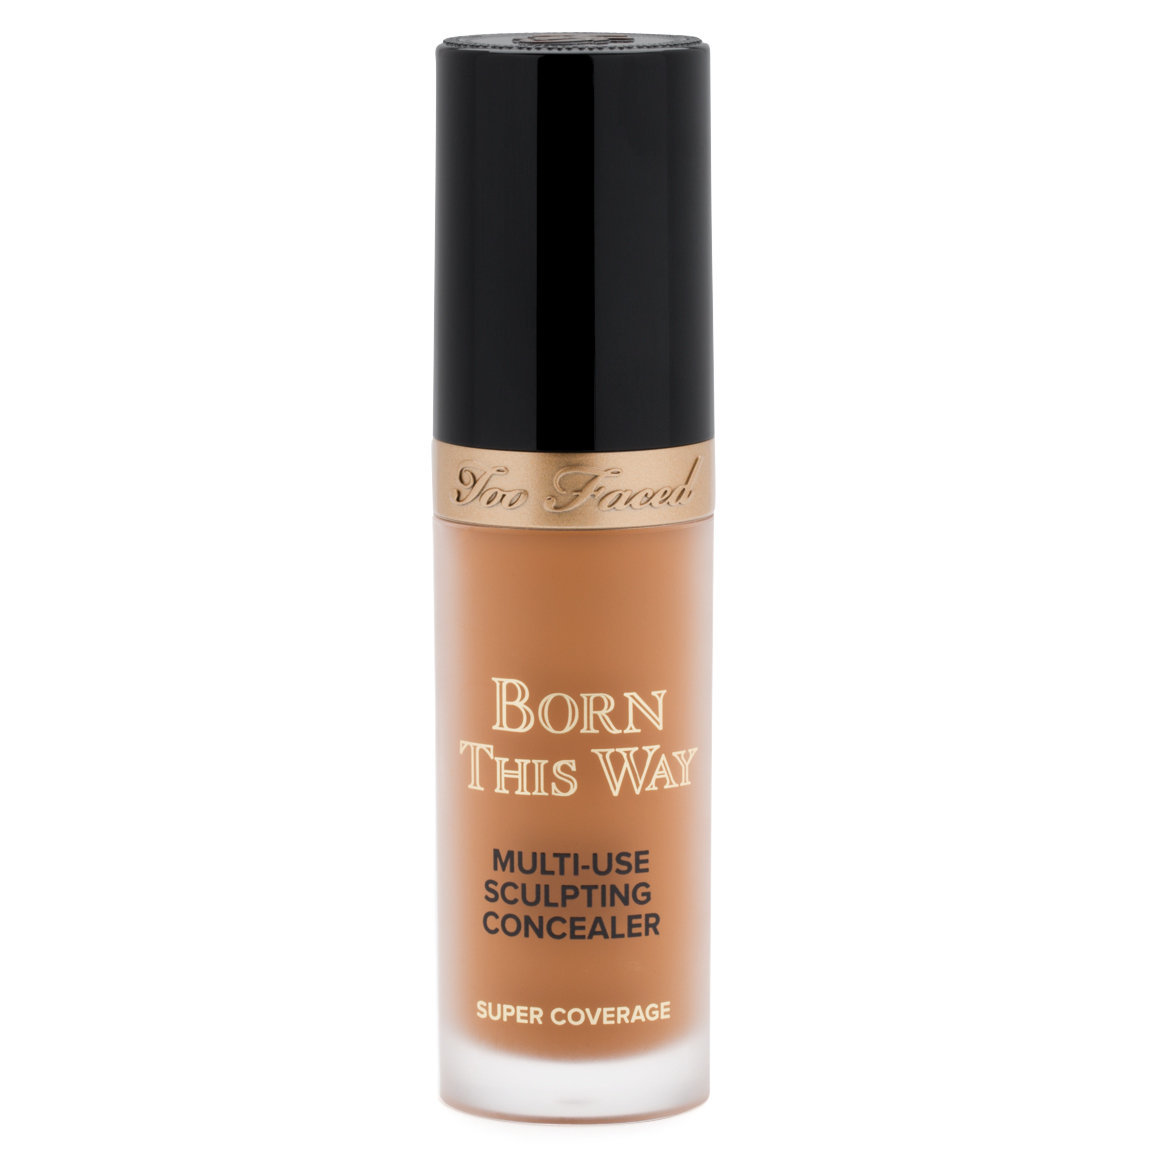 too faced born this way concealer super coverage shades